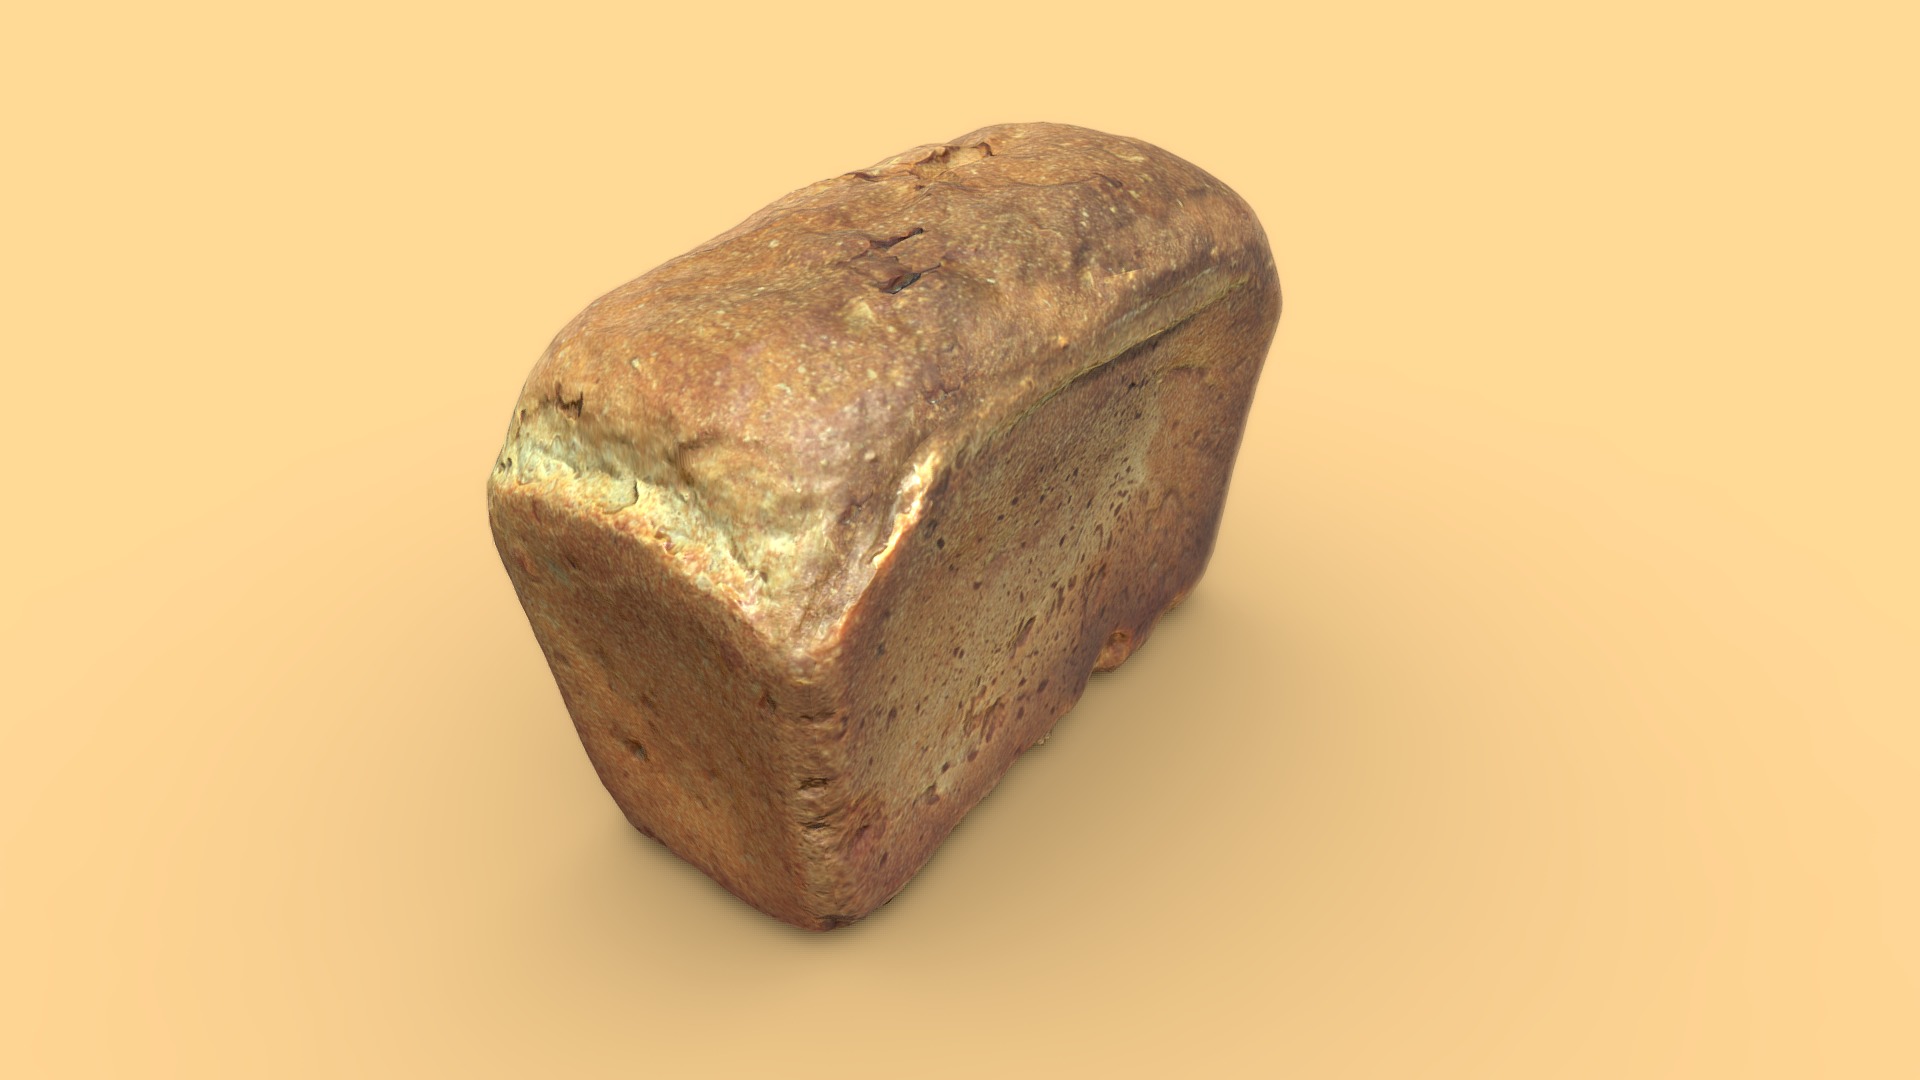 3D model loaf of bread scan - This is a 3D model of the loaf of bread scan. The 3D model is about a rock with a dark green and white speckled surface.